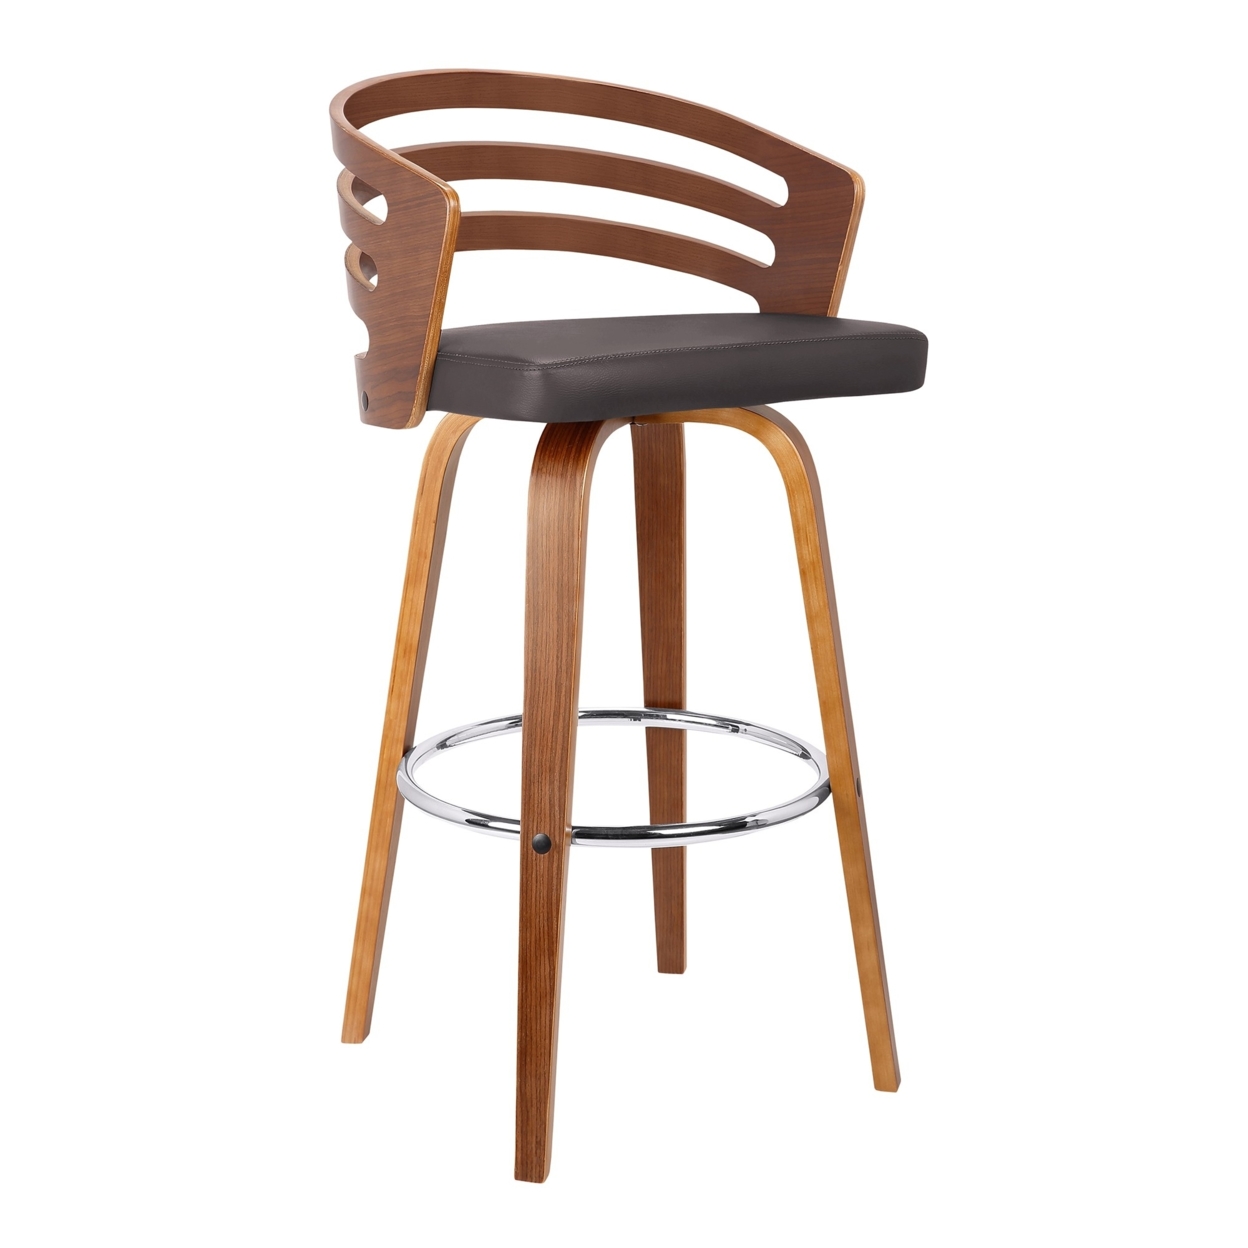 Leatherette Swivel Wooden Barstool With Curved Back, Brown- Saltoro Sherpi